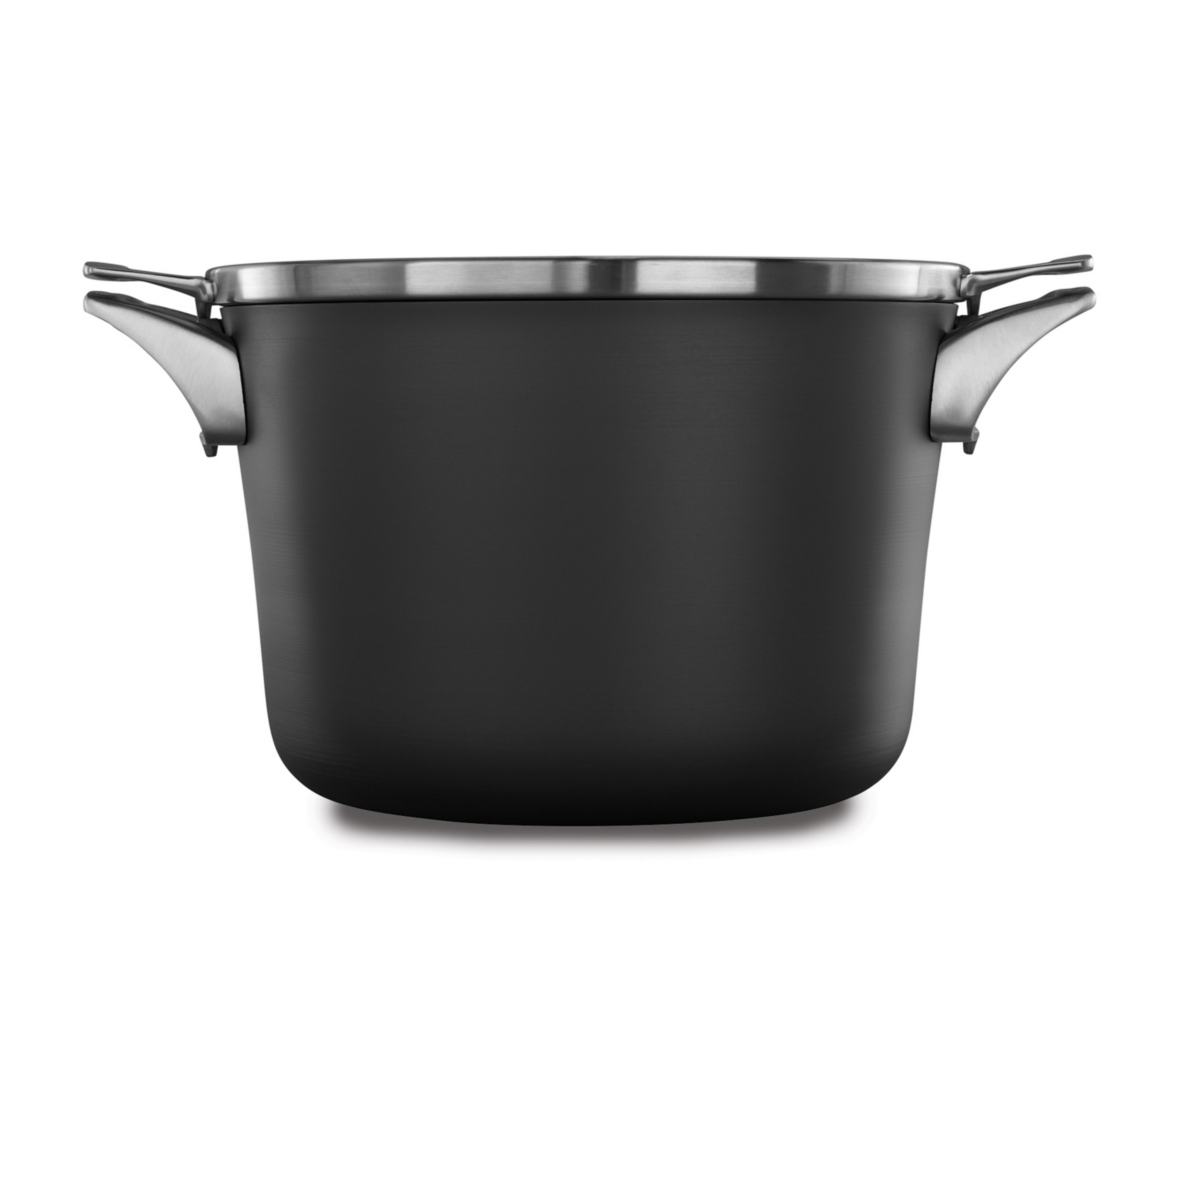 Calphalon Premier Space Saving Hard-anodized Nonstick 8 Quart Stock Pot With Lid In Black,stainless Steel